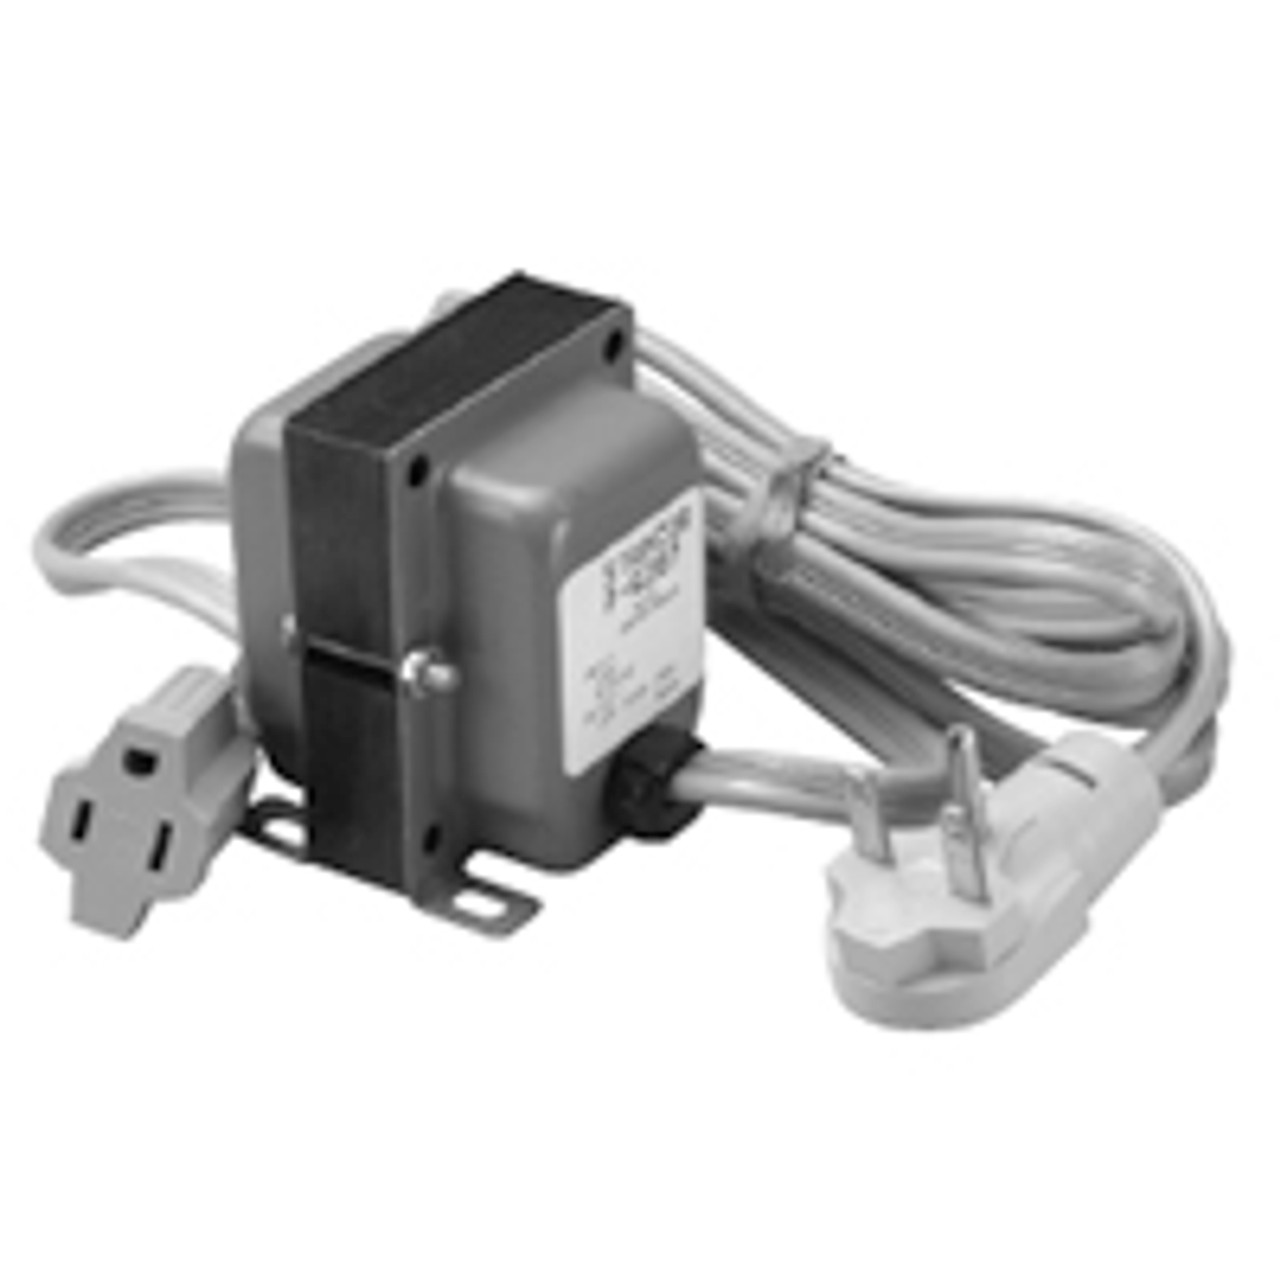 Stancor / White Rodgers P-8632 Step-Down Transformers